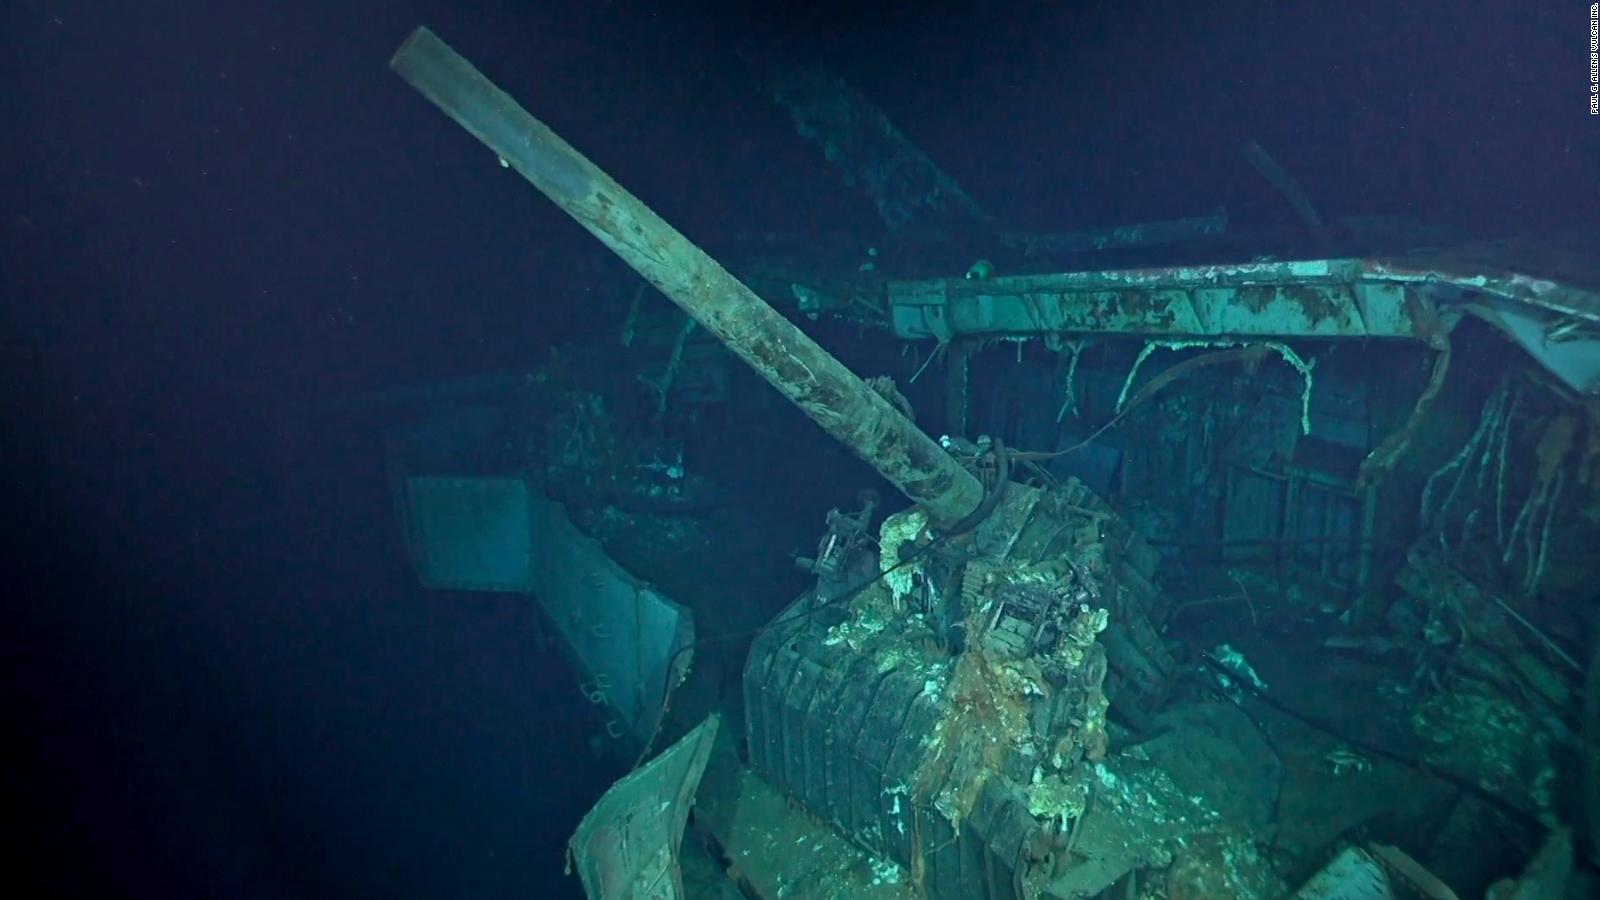 Wreck Of Wwii Us Navy Aircraft Carrier Uss Hornet Found In South